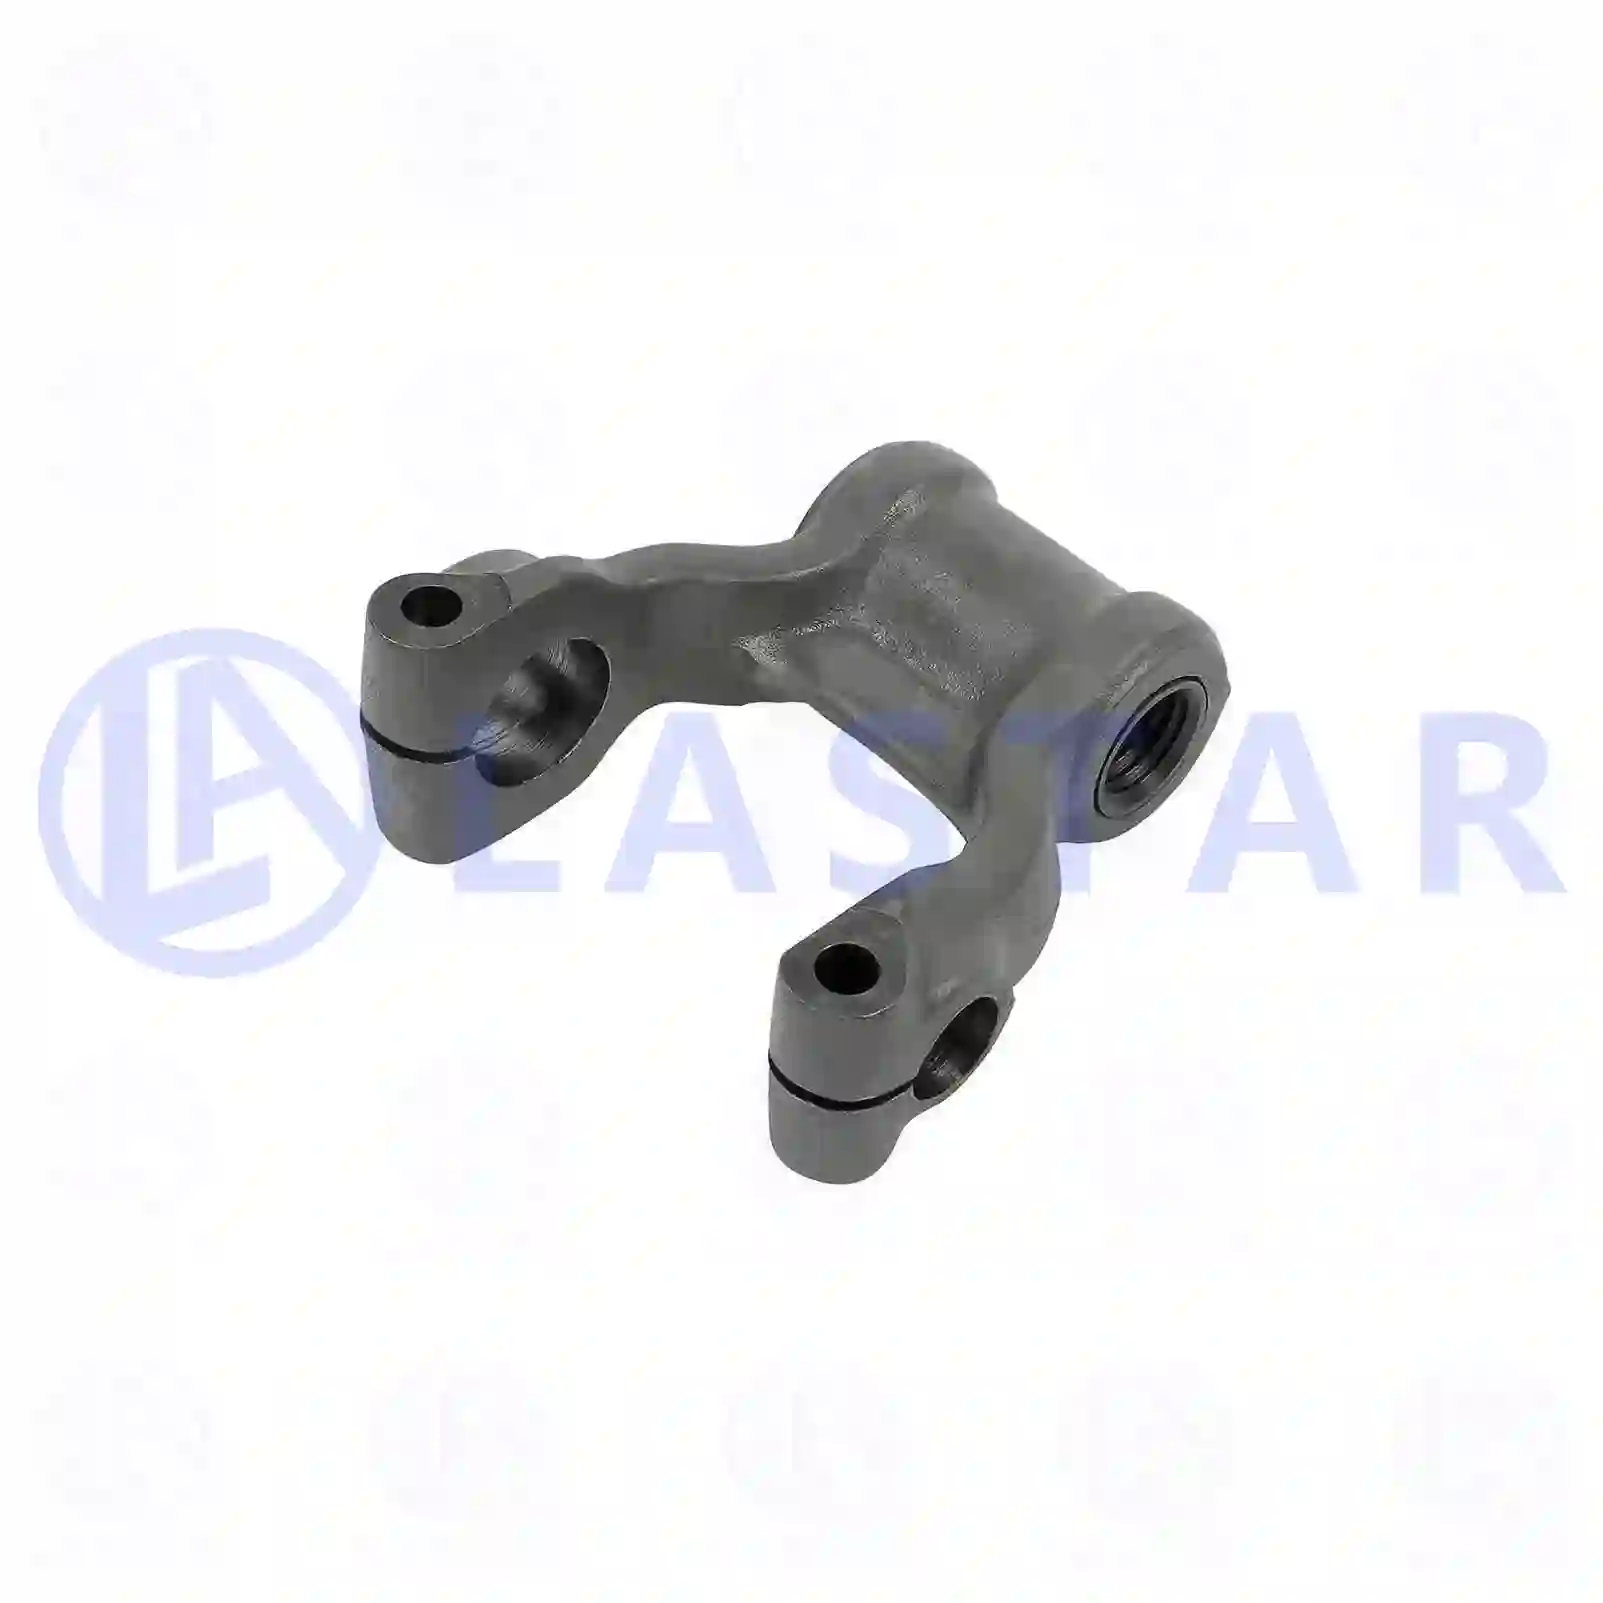 Spring shackle, 77729002, 1103026, 1377739, 275568, ZG41765-0008 ||  77729002 Lastar Spare Part | Truck Spare Parts, Auotomotive Spare Parts Spring shackle, 77729002, 1103026, 1377739, 275568, ZG41765-0008 ||  77729002 Lastar Spare Part | Truck Spare Parts, Auotomotive Spare Parts